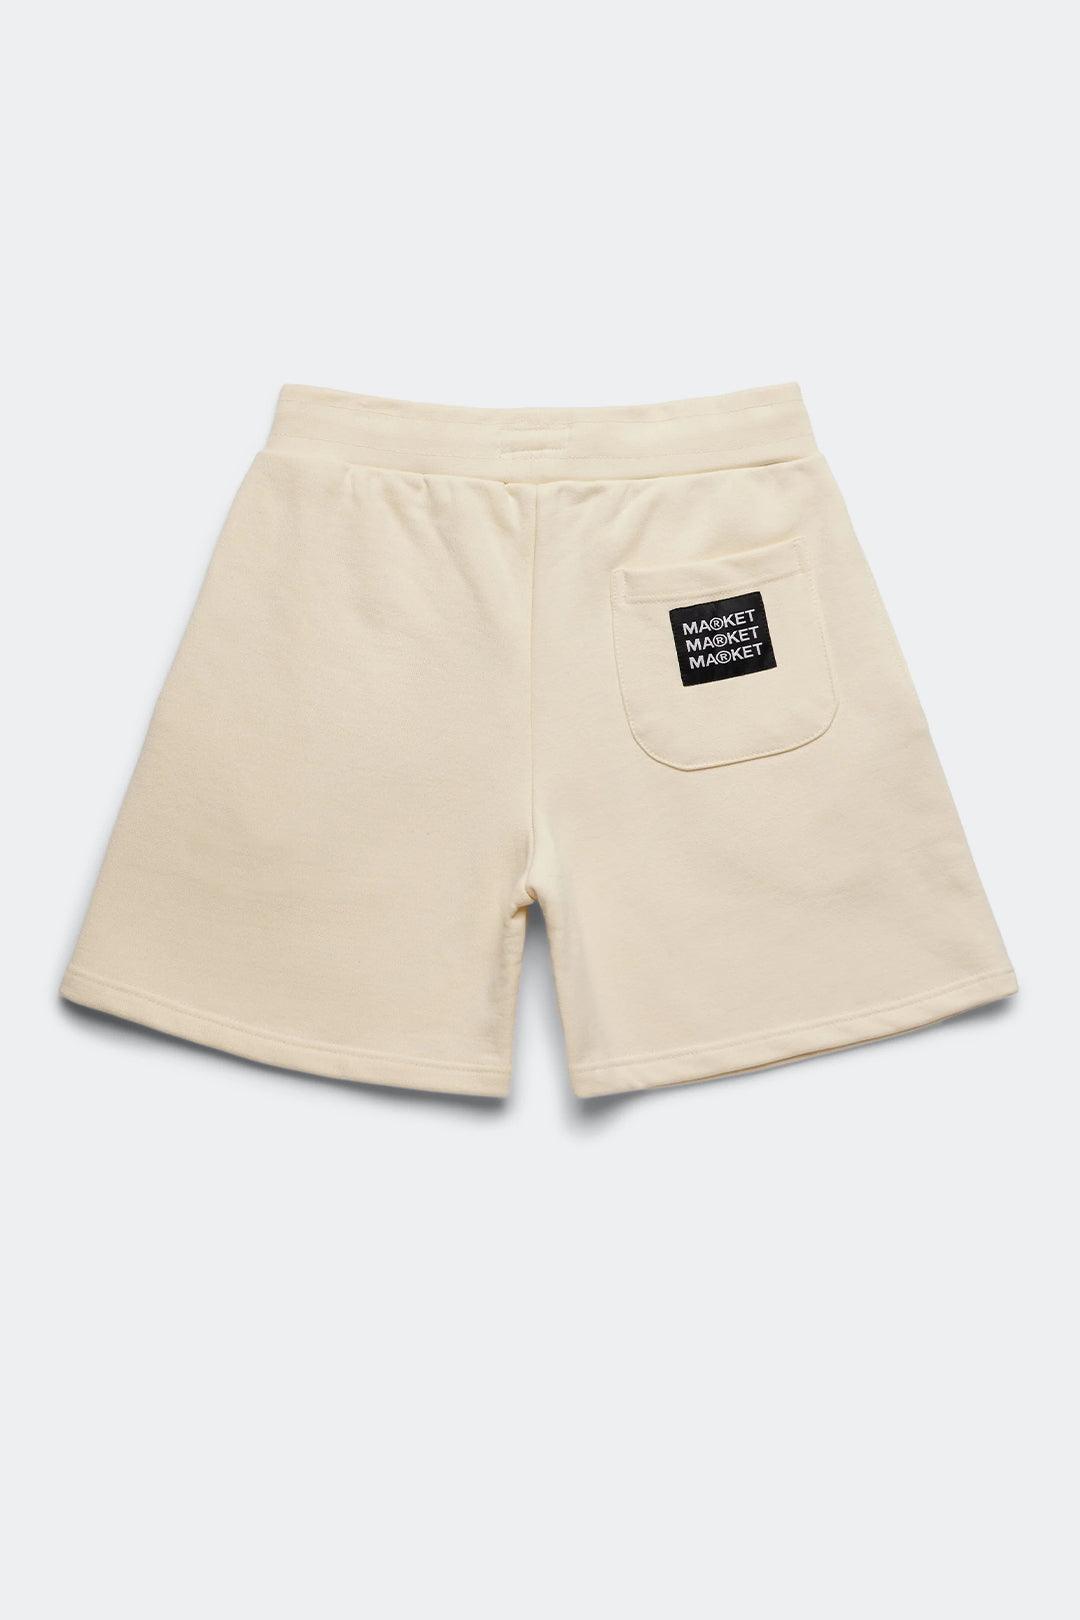 MARKET SHORT SMILEY GOOD AND EVIL "CREMA" - HYPE (7394608906407)